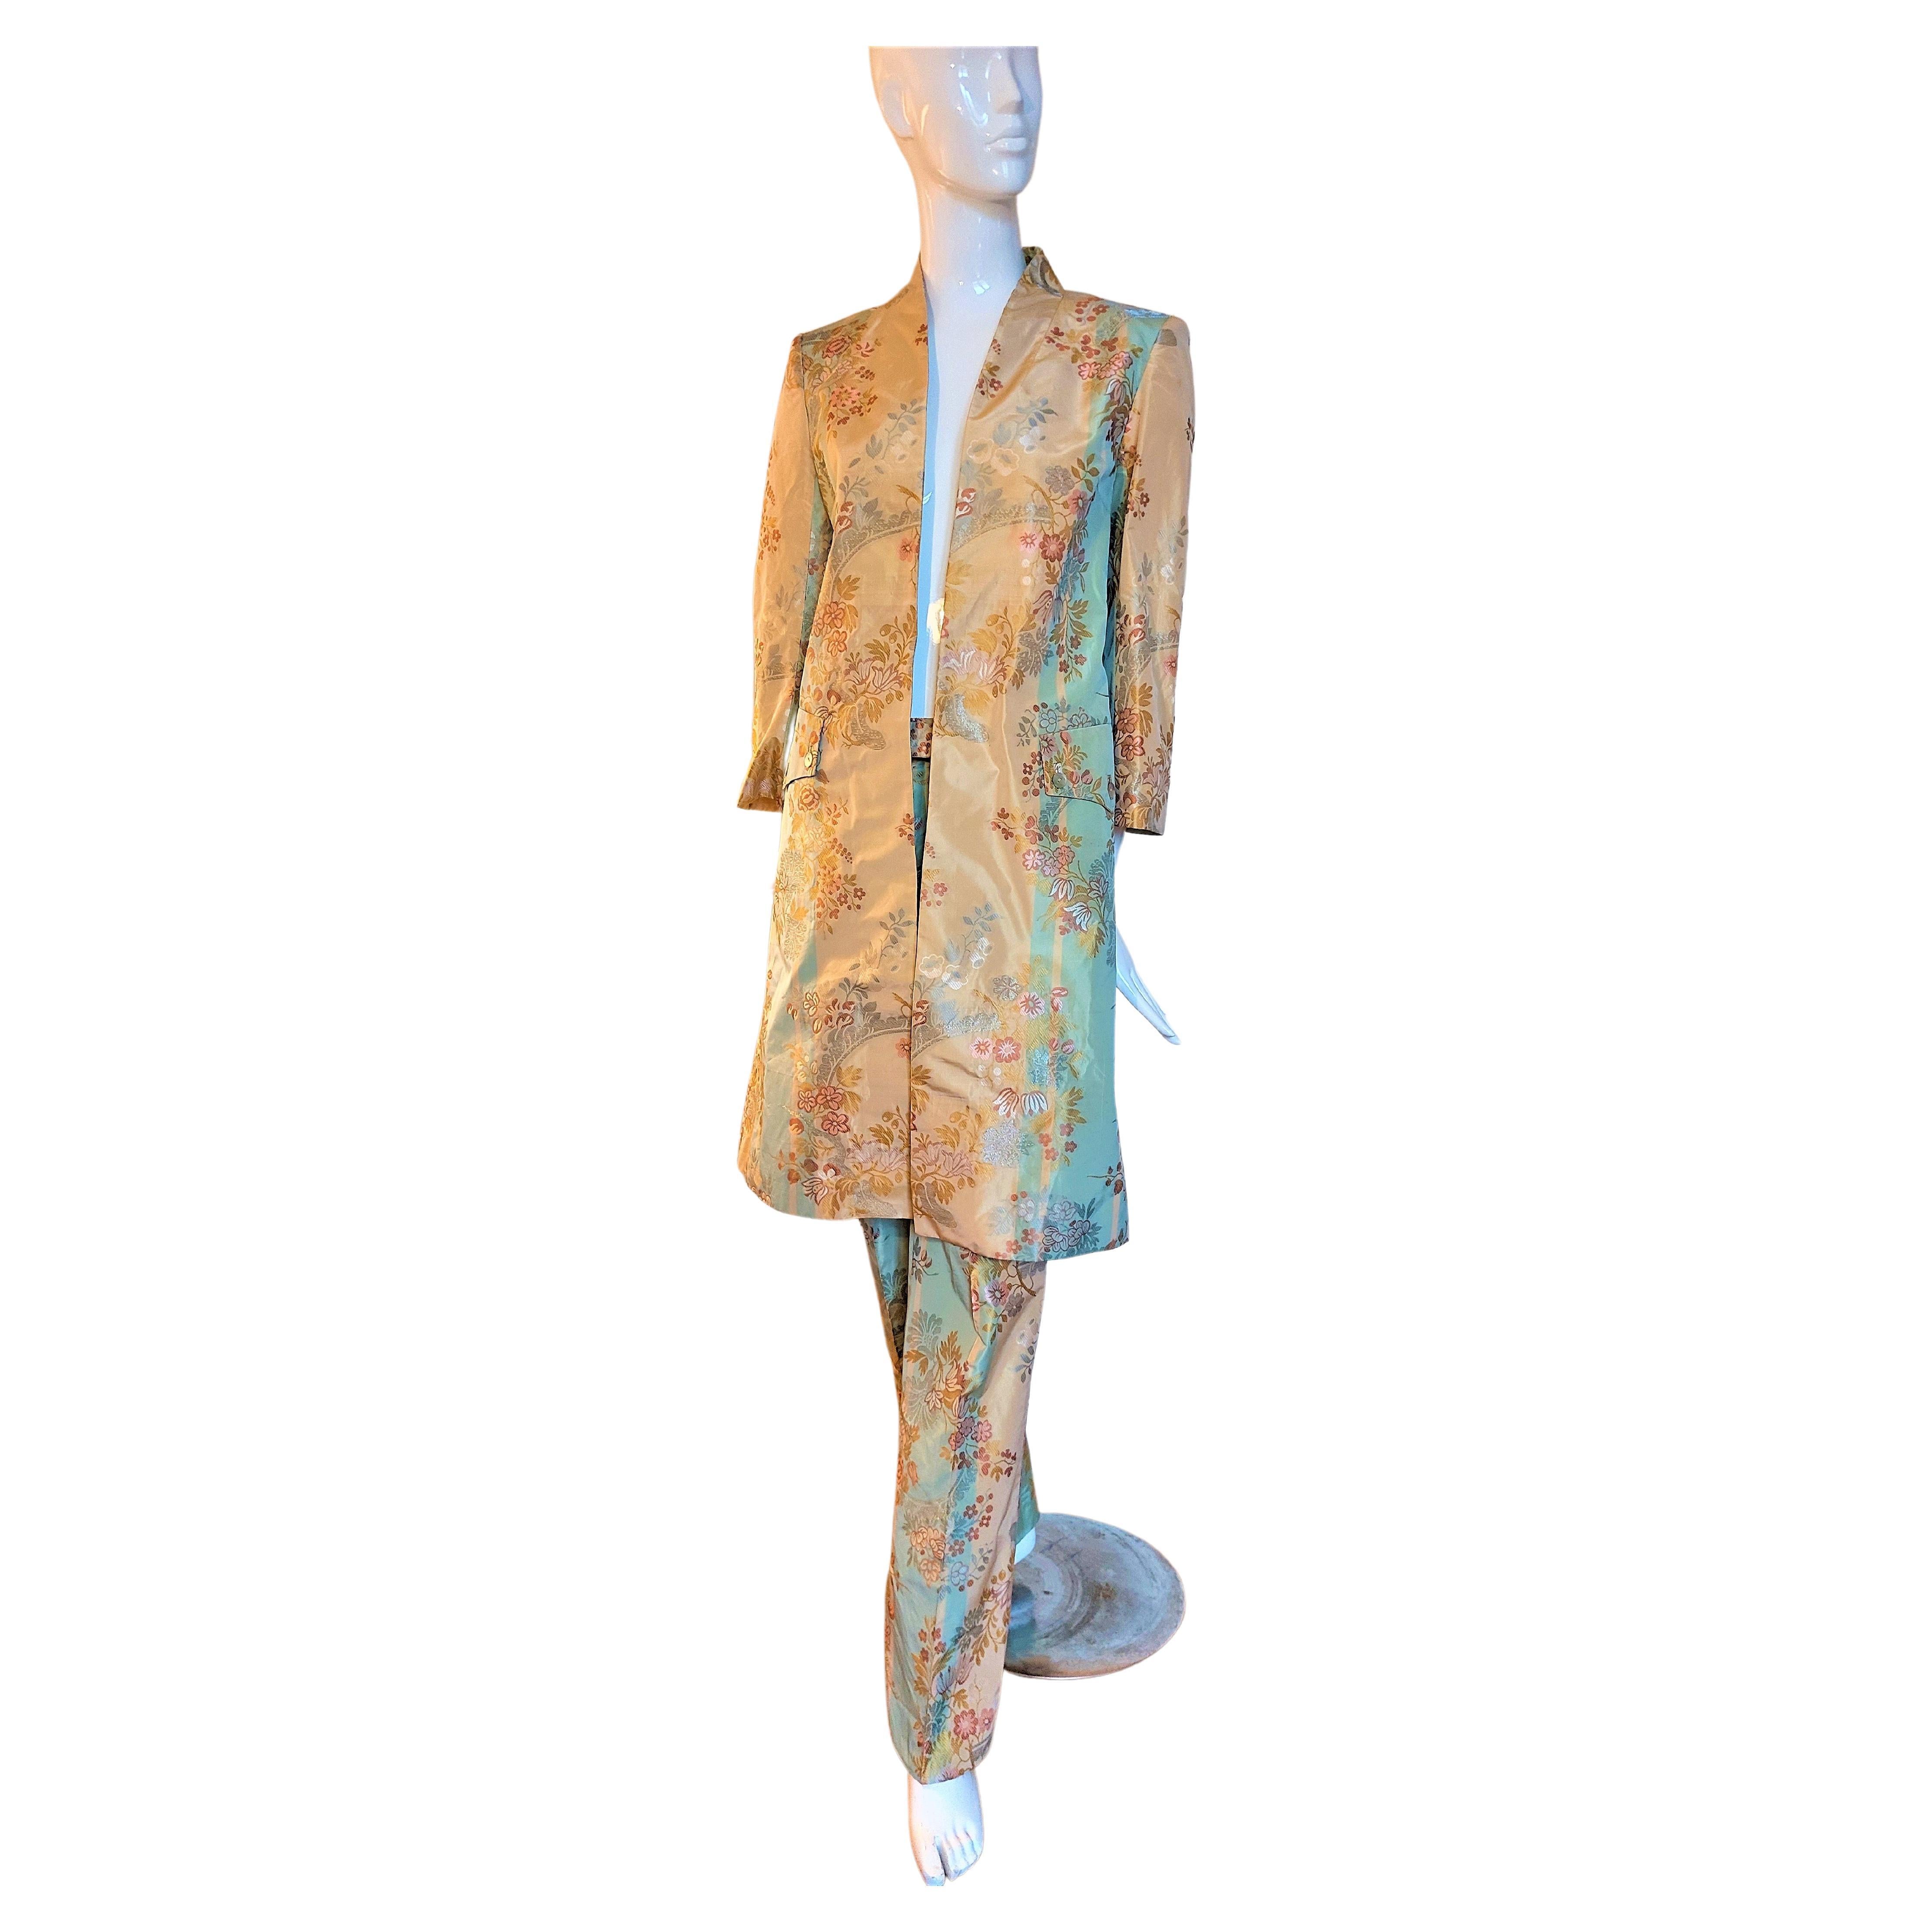 Alexander Mcqueen Shipwreck 2000S Silk Brocade Frock Pirate Trousers Jacket Suit For Sale